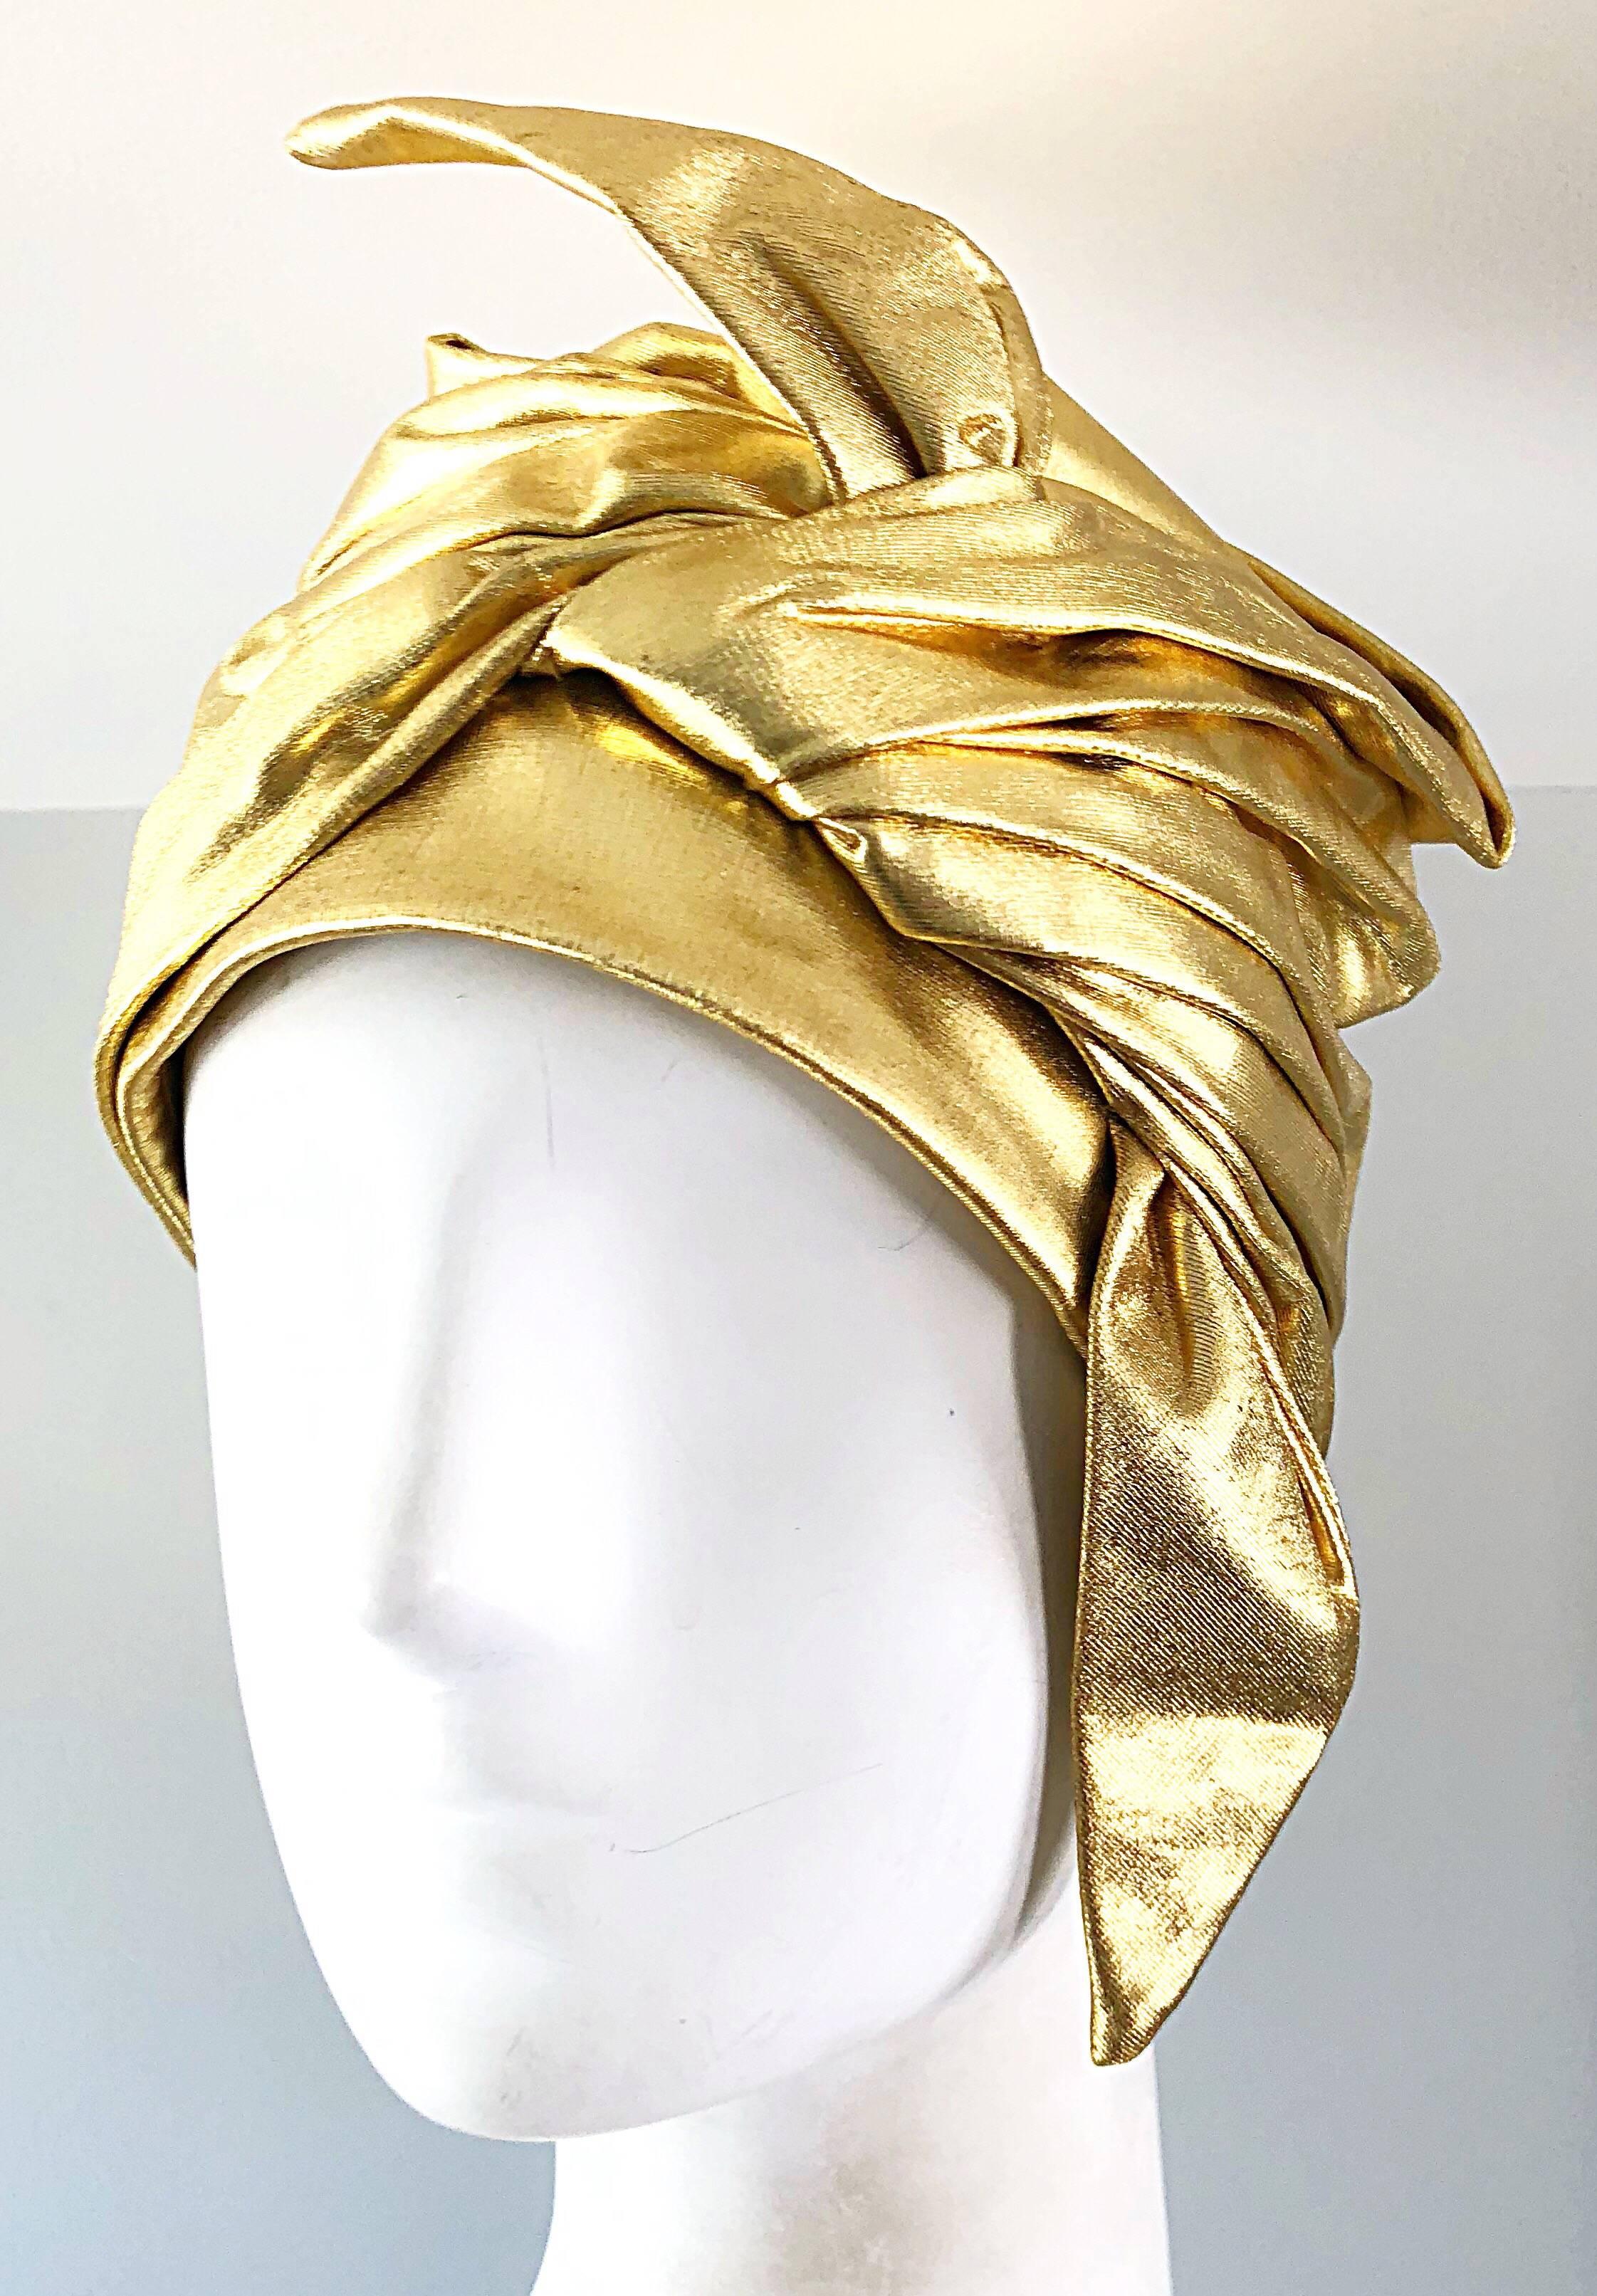 Rare vintage 1950s CHRISTIAN DIOR gold lame Avant Garde turban hat! So much detail on this demi couture piece. A true head turner that is an exceptional and timeless addition to any wardrobe, that will only appreciate in value over time. In great